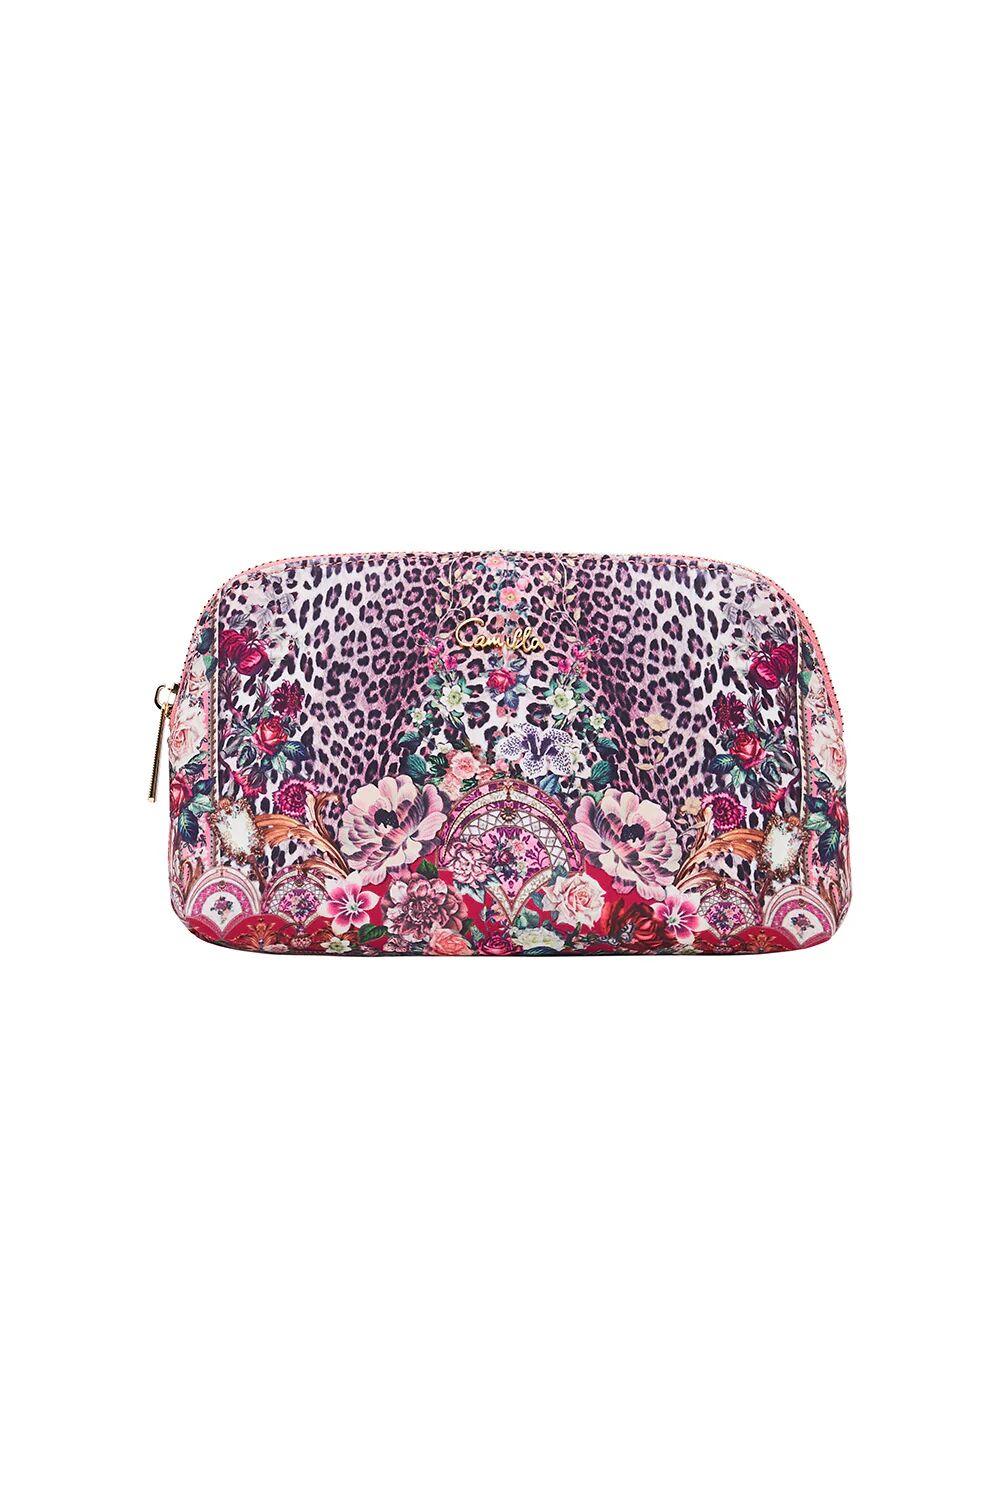 Camilla eBoutique Small Cosmetic Case Anarchy at Annabels, O/S  - Size: O/S